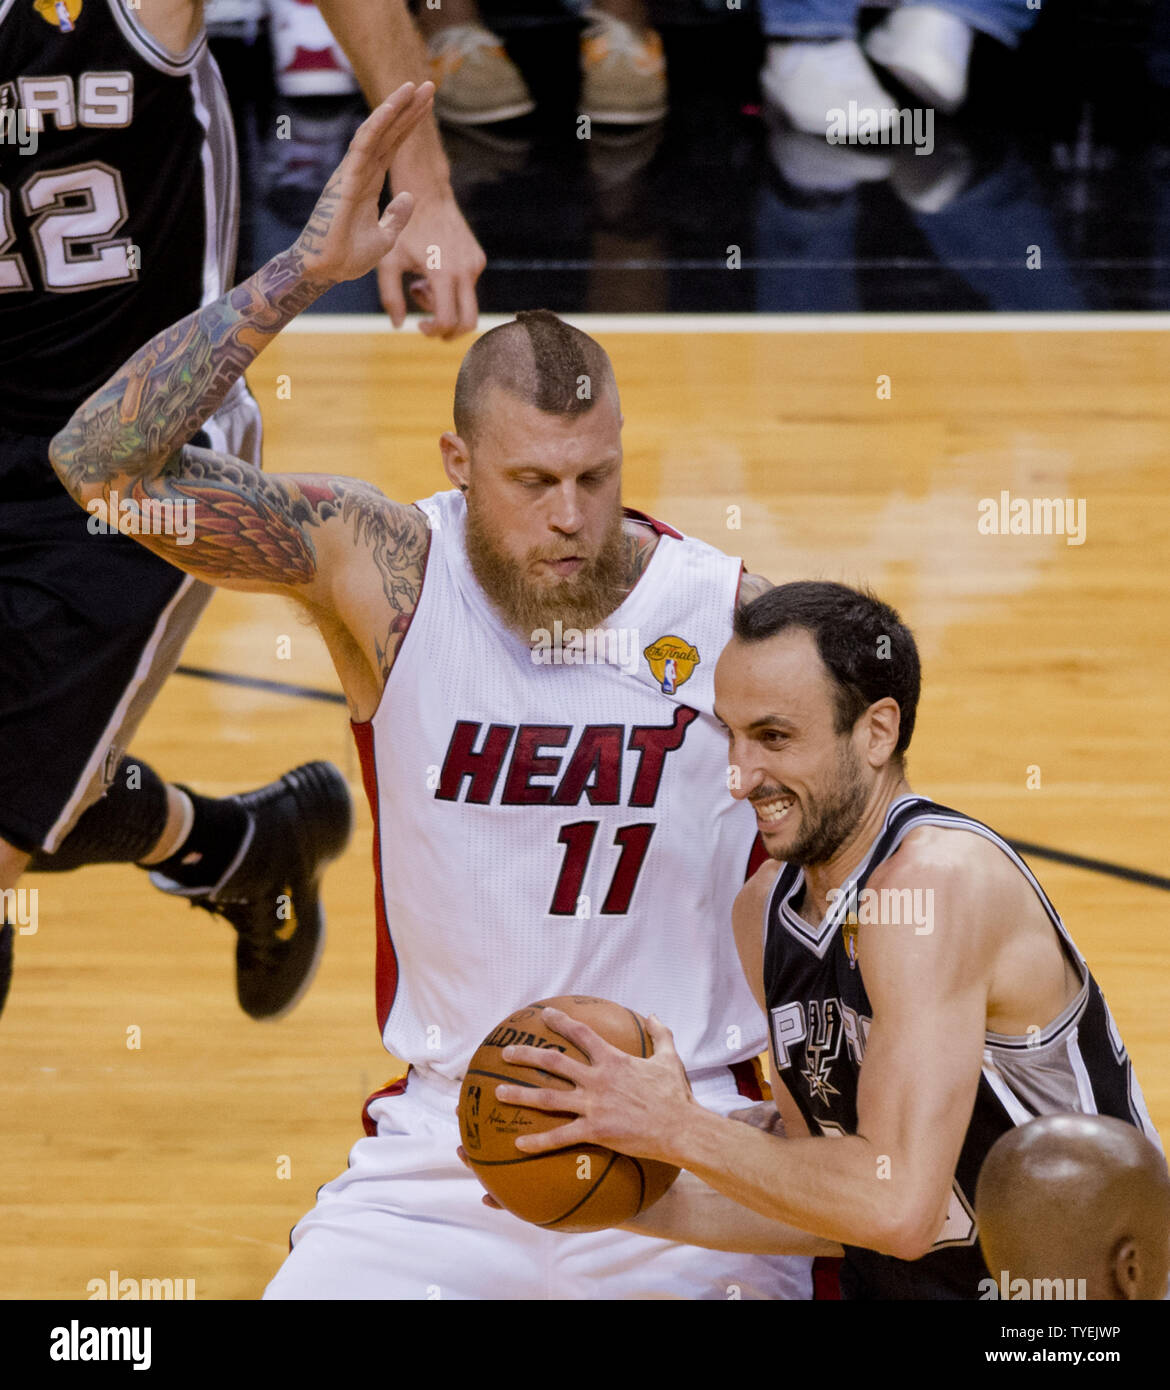 San Antonio Spurs Manu Ginobili (20) drives past  Miami Heat Chris Andersen (11)  in game 4 of the NBA Finals at the American Airlines Arena, in Miami, June 12, 2014. The Spurs defeated the Heat 107-86 to take a 3-1 game lead in the best of seven games. UPI/Gary I Rothstein Stock Photo